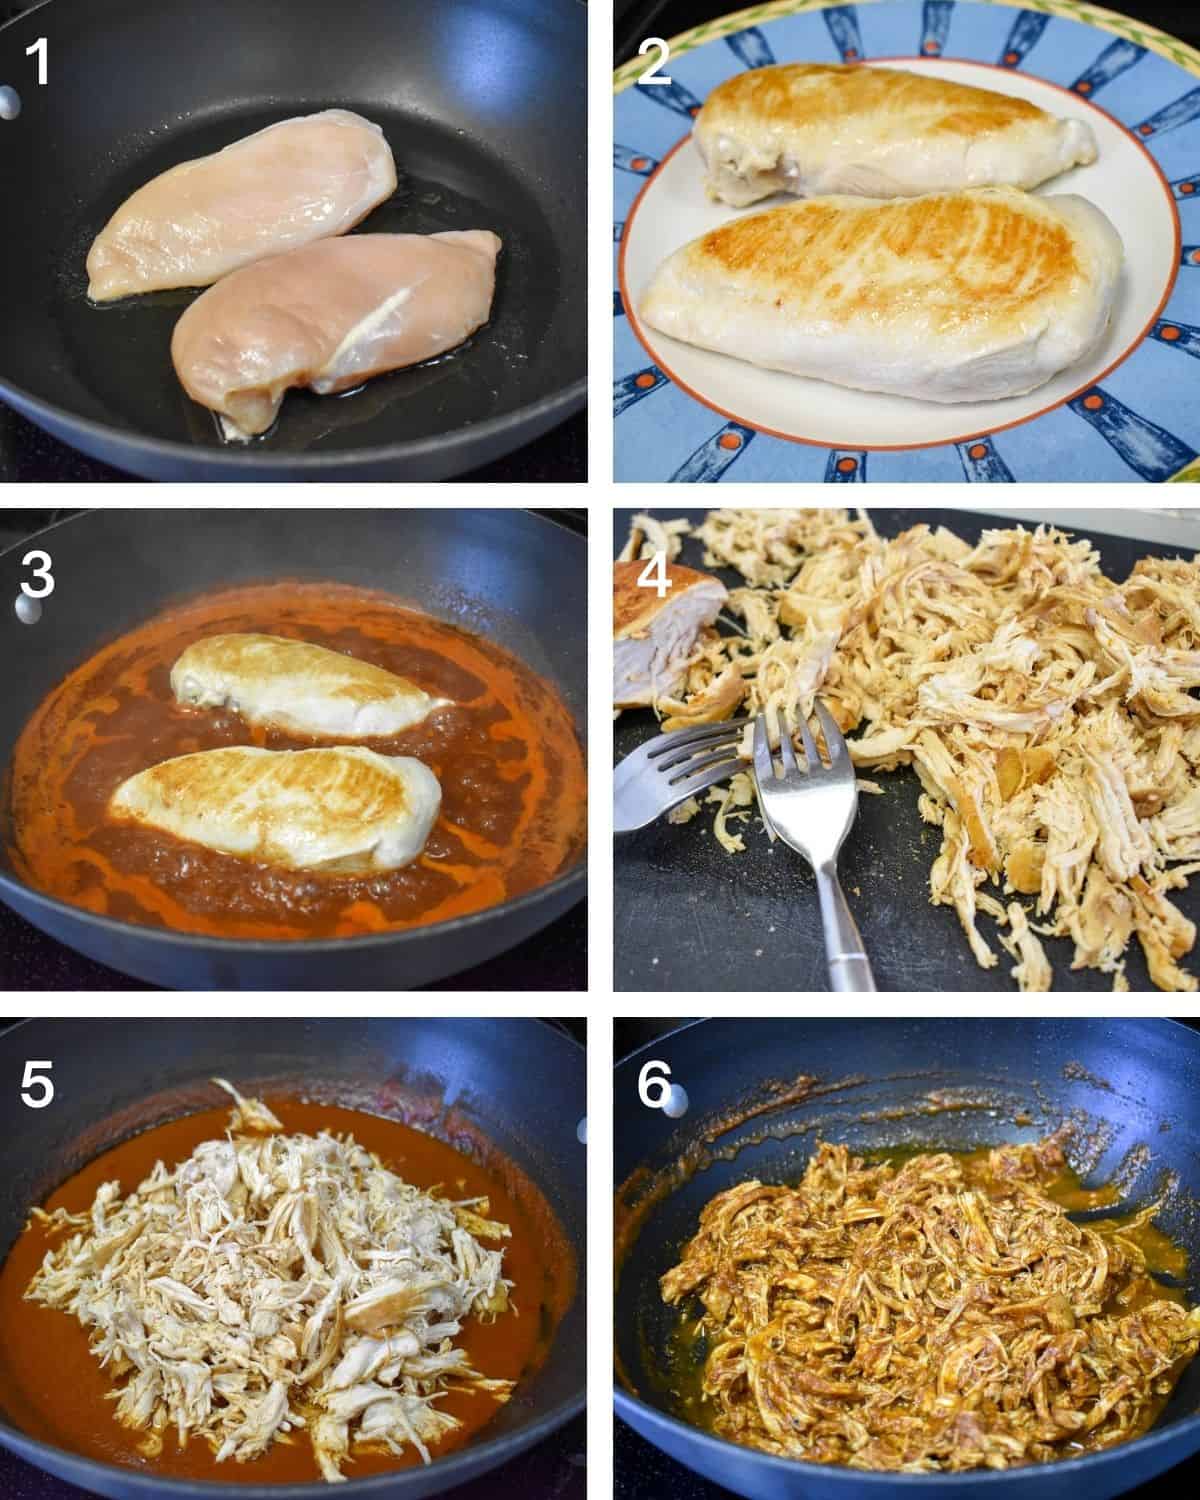 A collage of six images illustrating the steps to making the shredded chicken topping for the nachos.